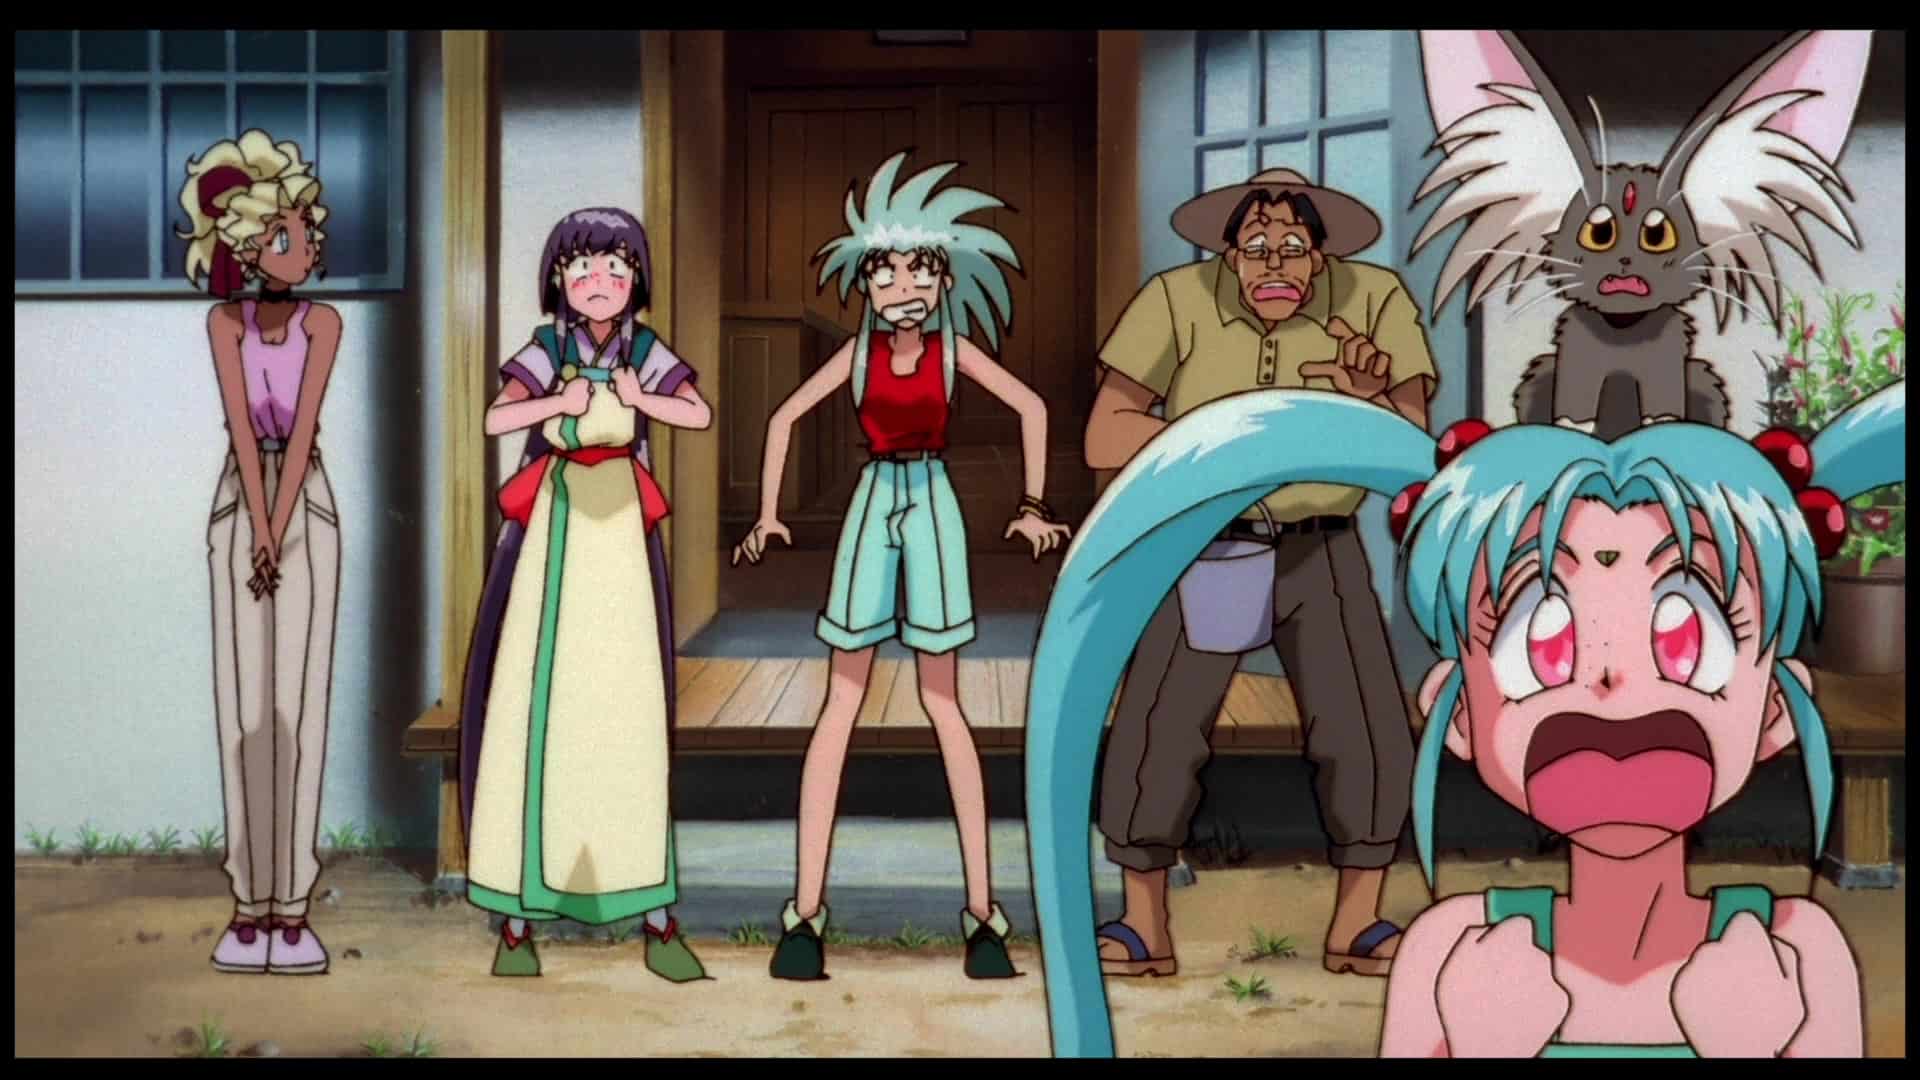 Tenchi The Movie 2: The Daughter of Darkness (1997)